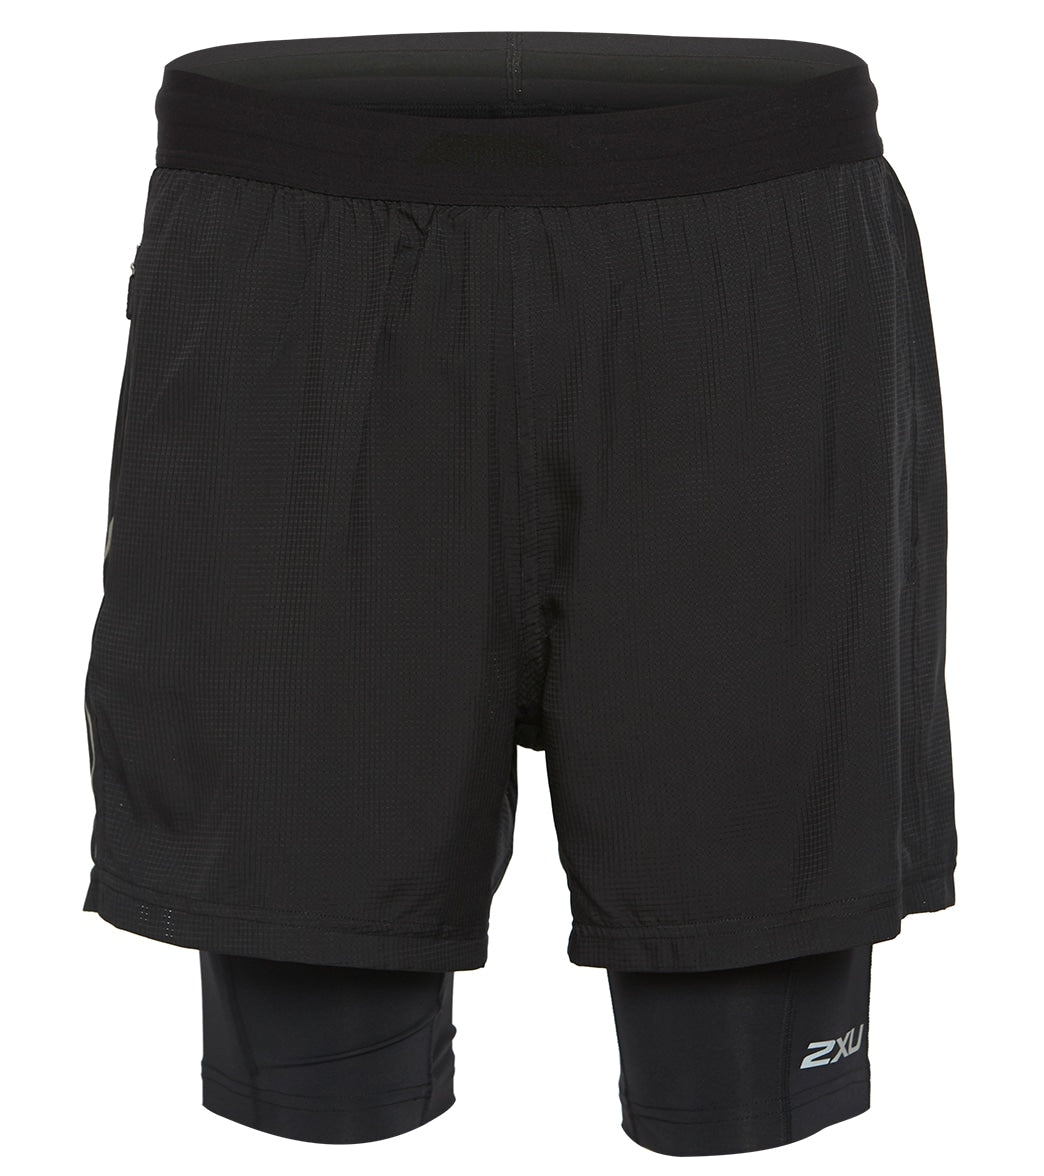 2Xu Men's Xvent 5 Inch 2 In 1 Compression Short - Black/Silver Reflective Xl Polyester - Swimoutlet.com